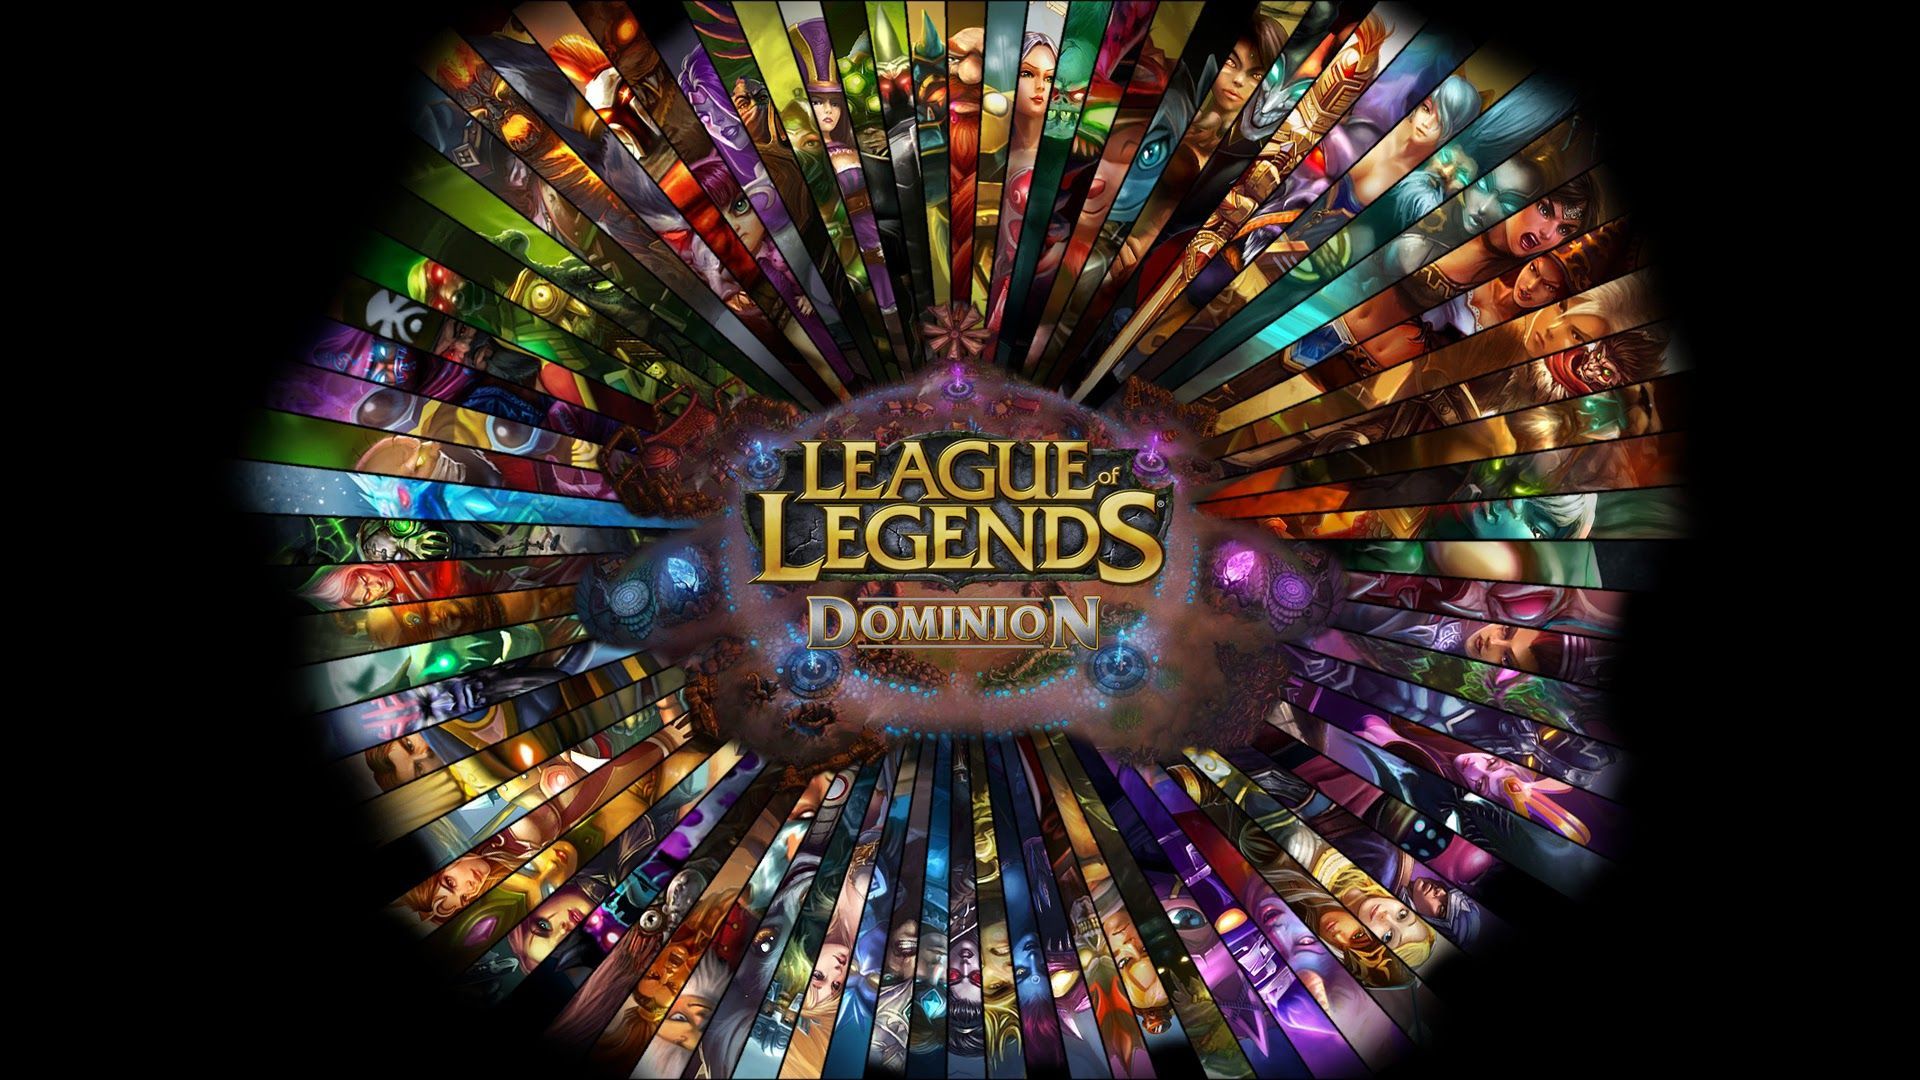 Download League of Legends Wallpapers 4107 1920x1080 px High ...